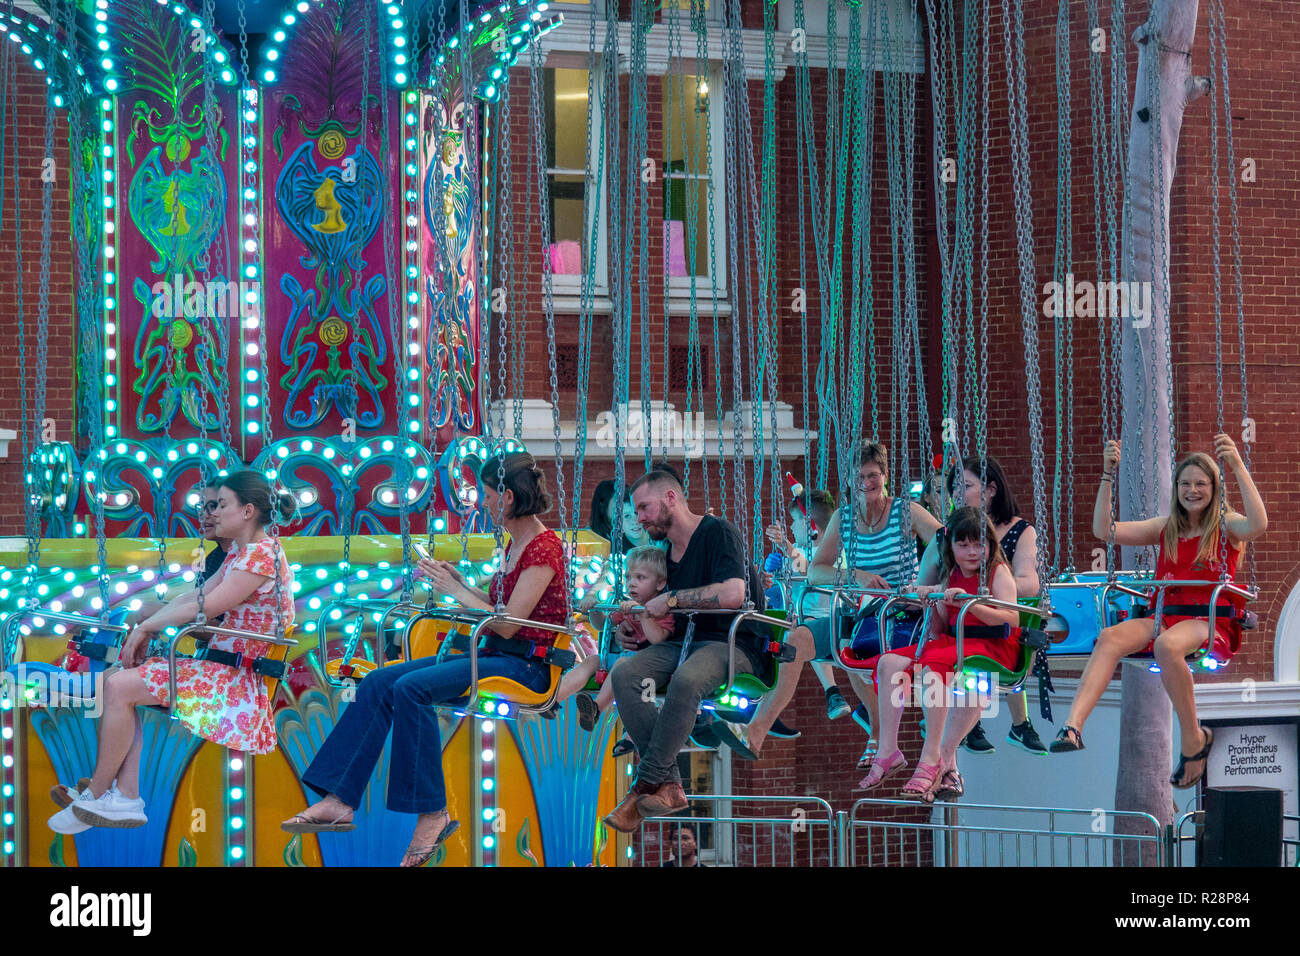 People sitting on a carousel waiting  for the ride to start Christmas festival Perth Western Australia. Stock Photo